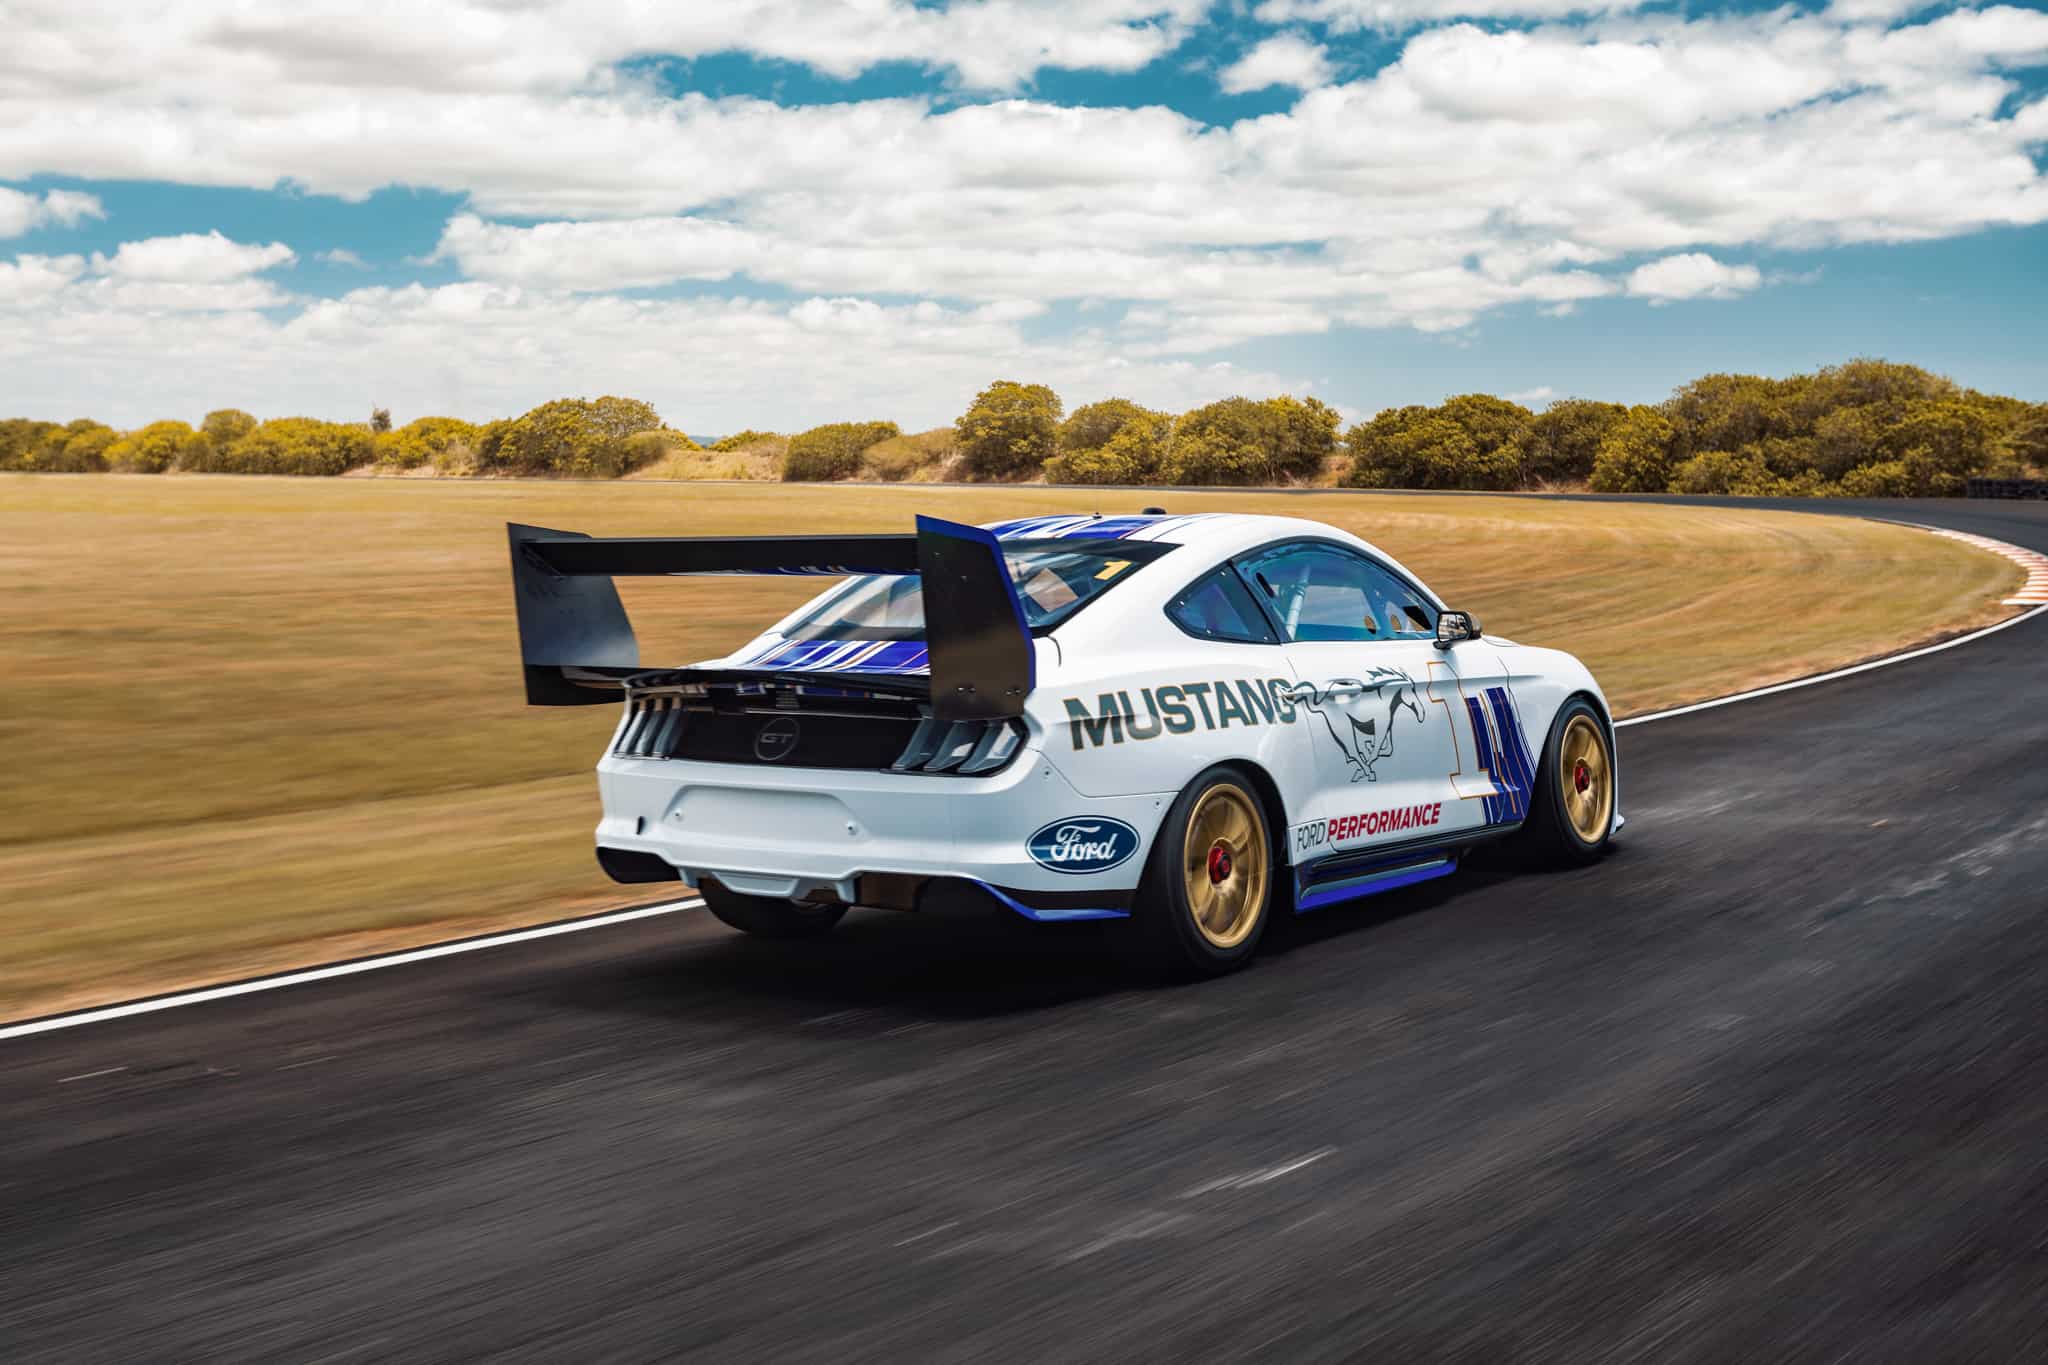 Mustang Supercar on track - Back view 3